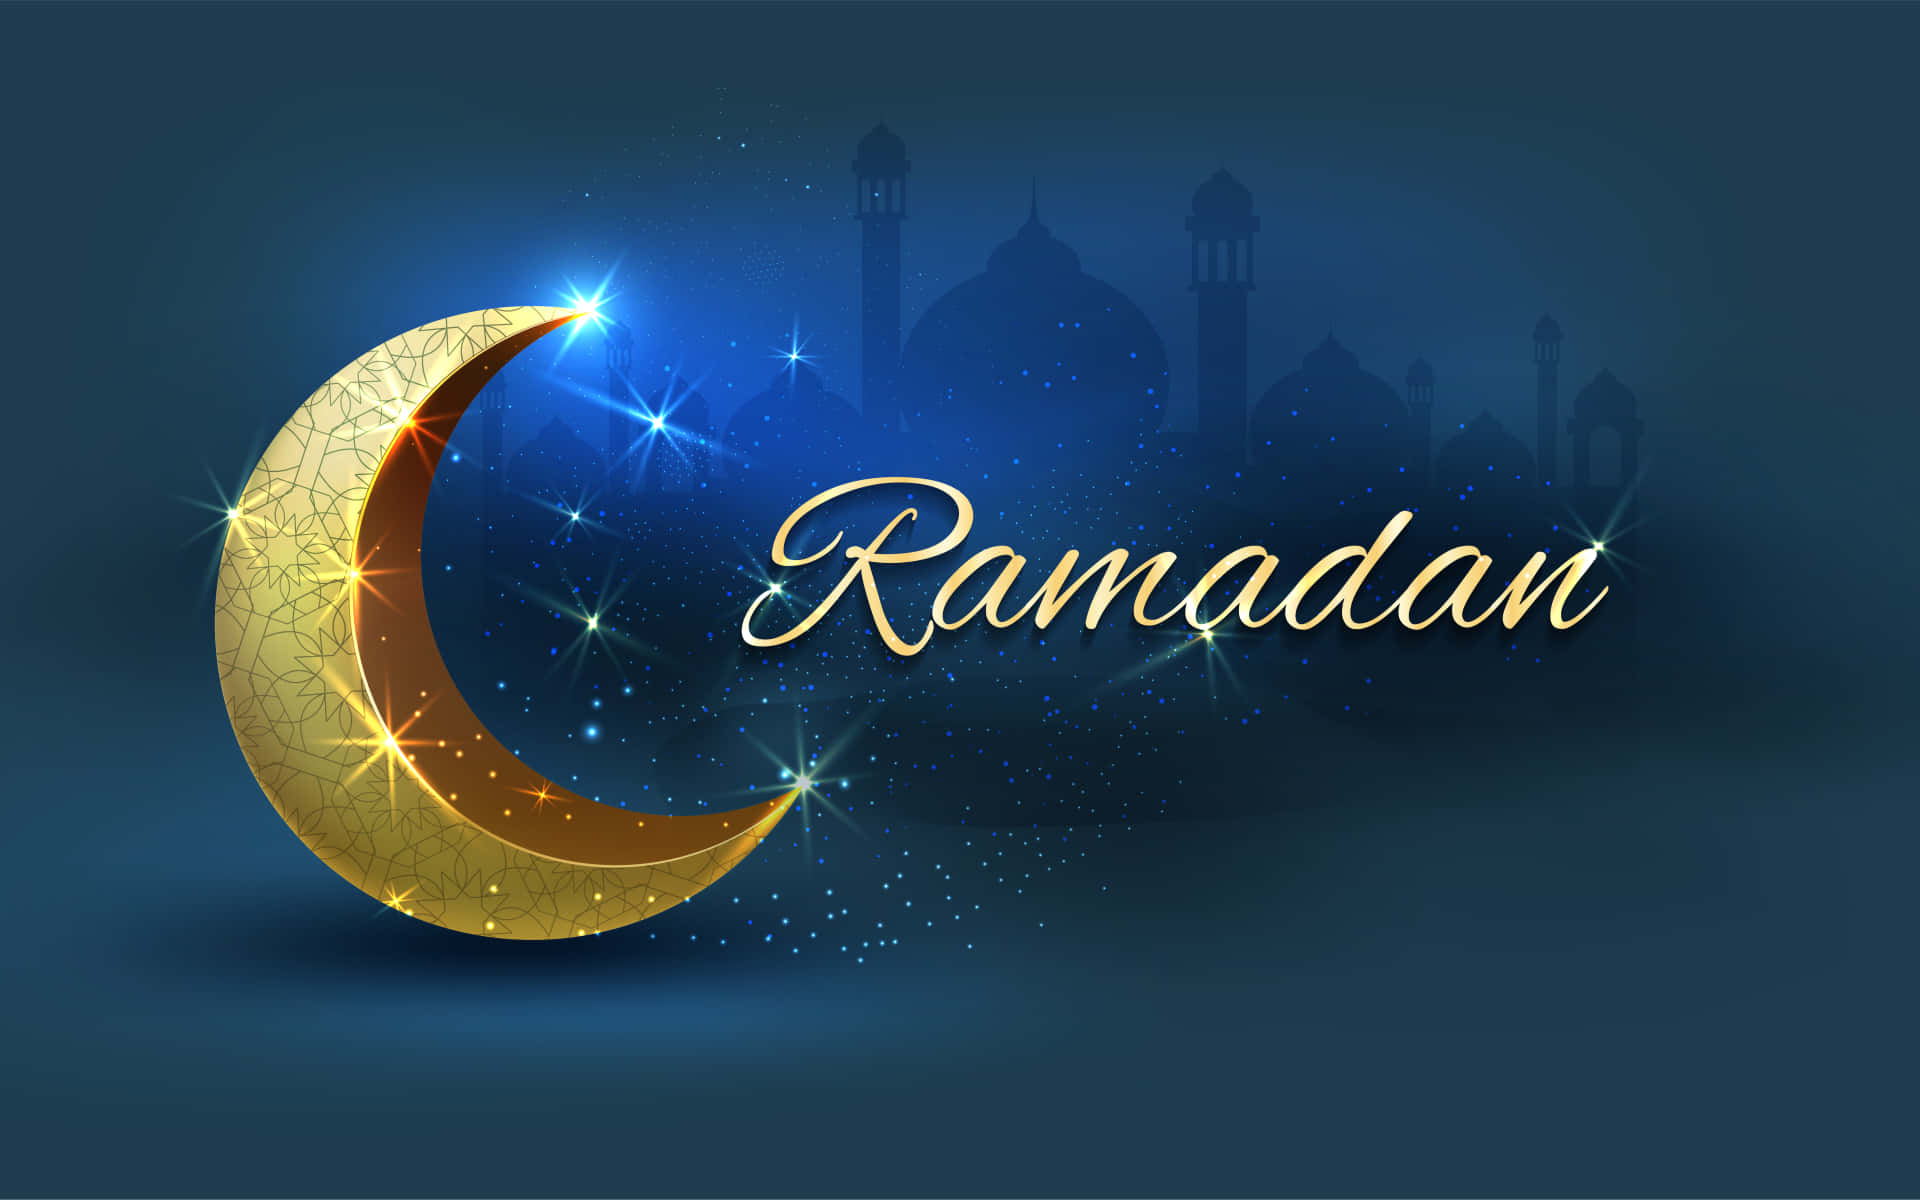 Have a blessed and happy Ramadan!